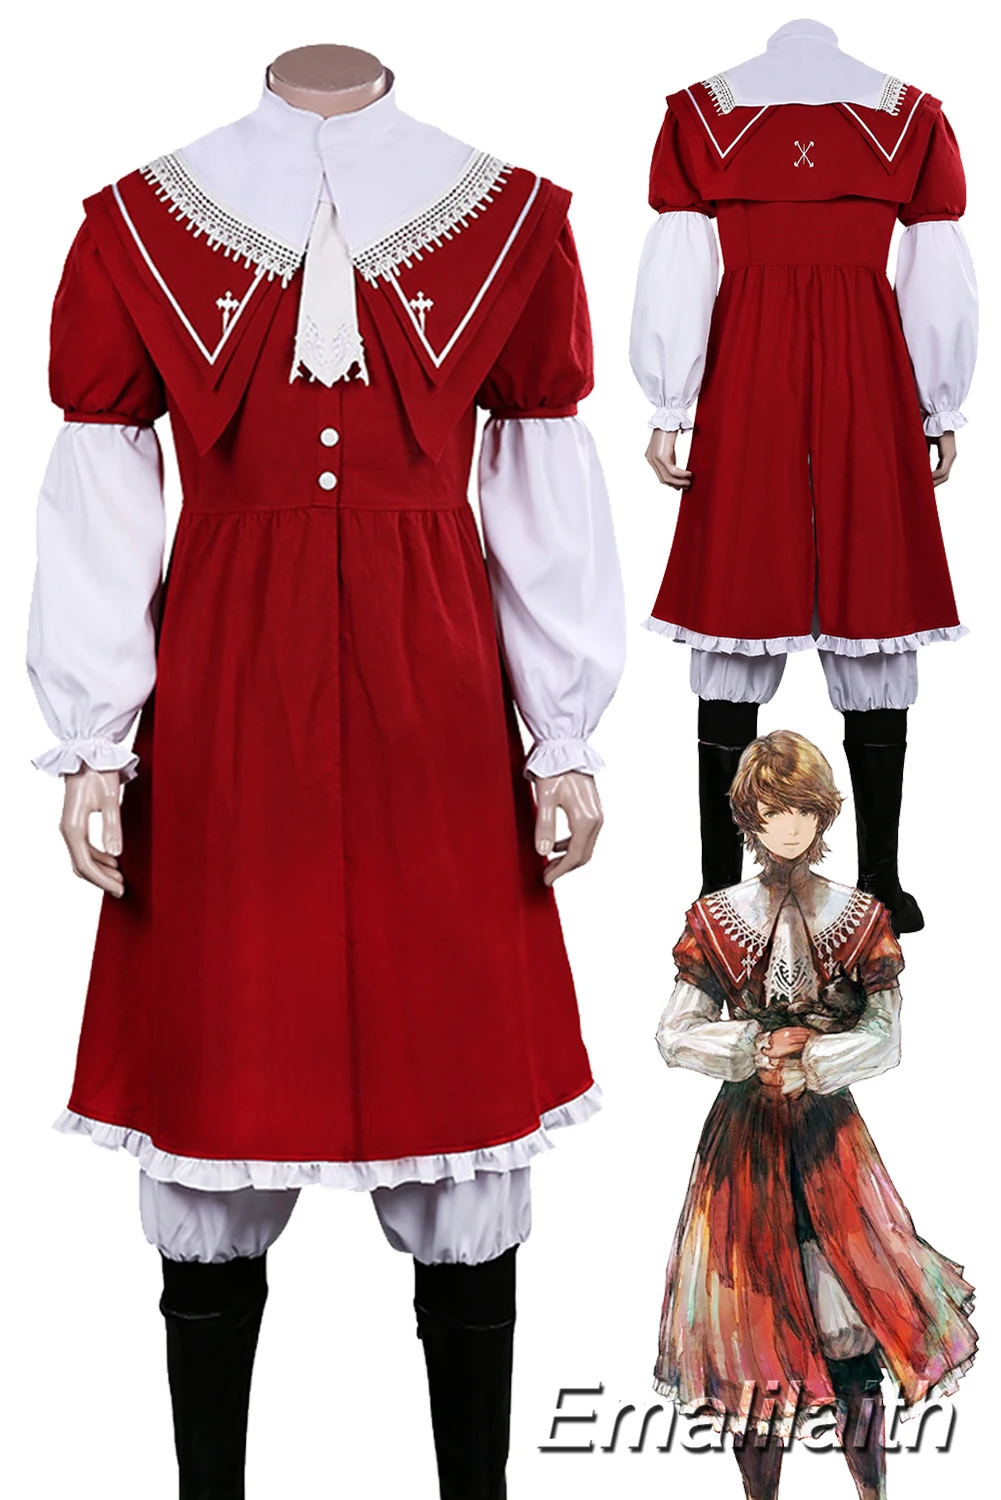 

FF16 Joshua Rosfield Cosplay Role Play Anime Game Final Fantasy XVI Costume Disguise Adult Men Fancy Dress Up Party Clothes